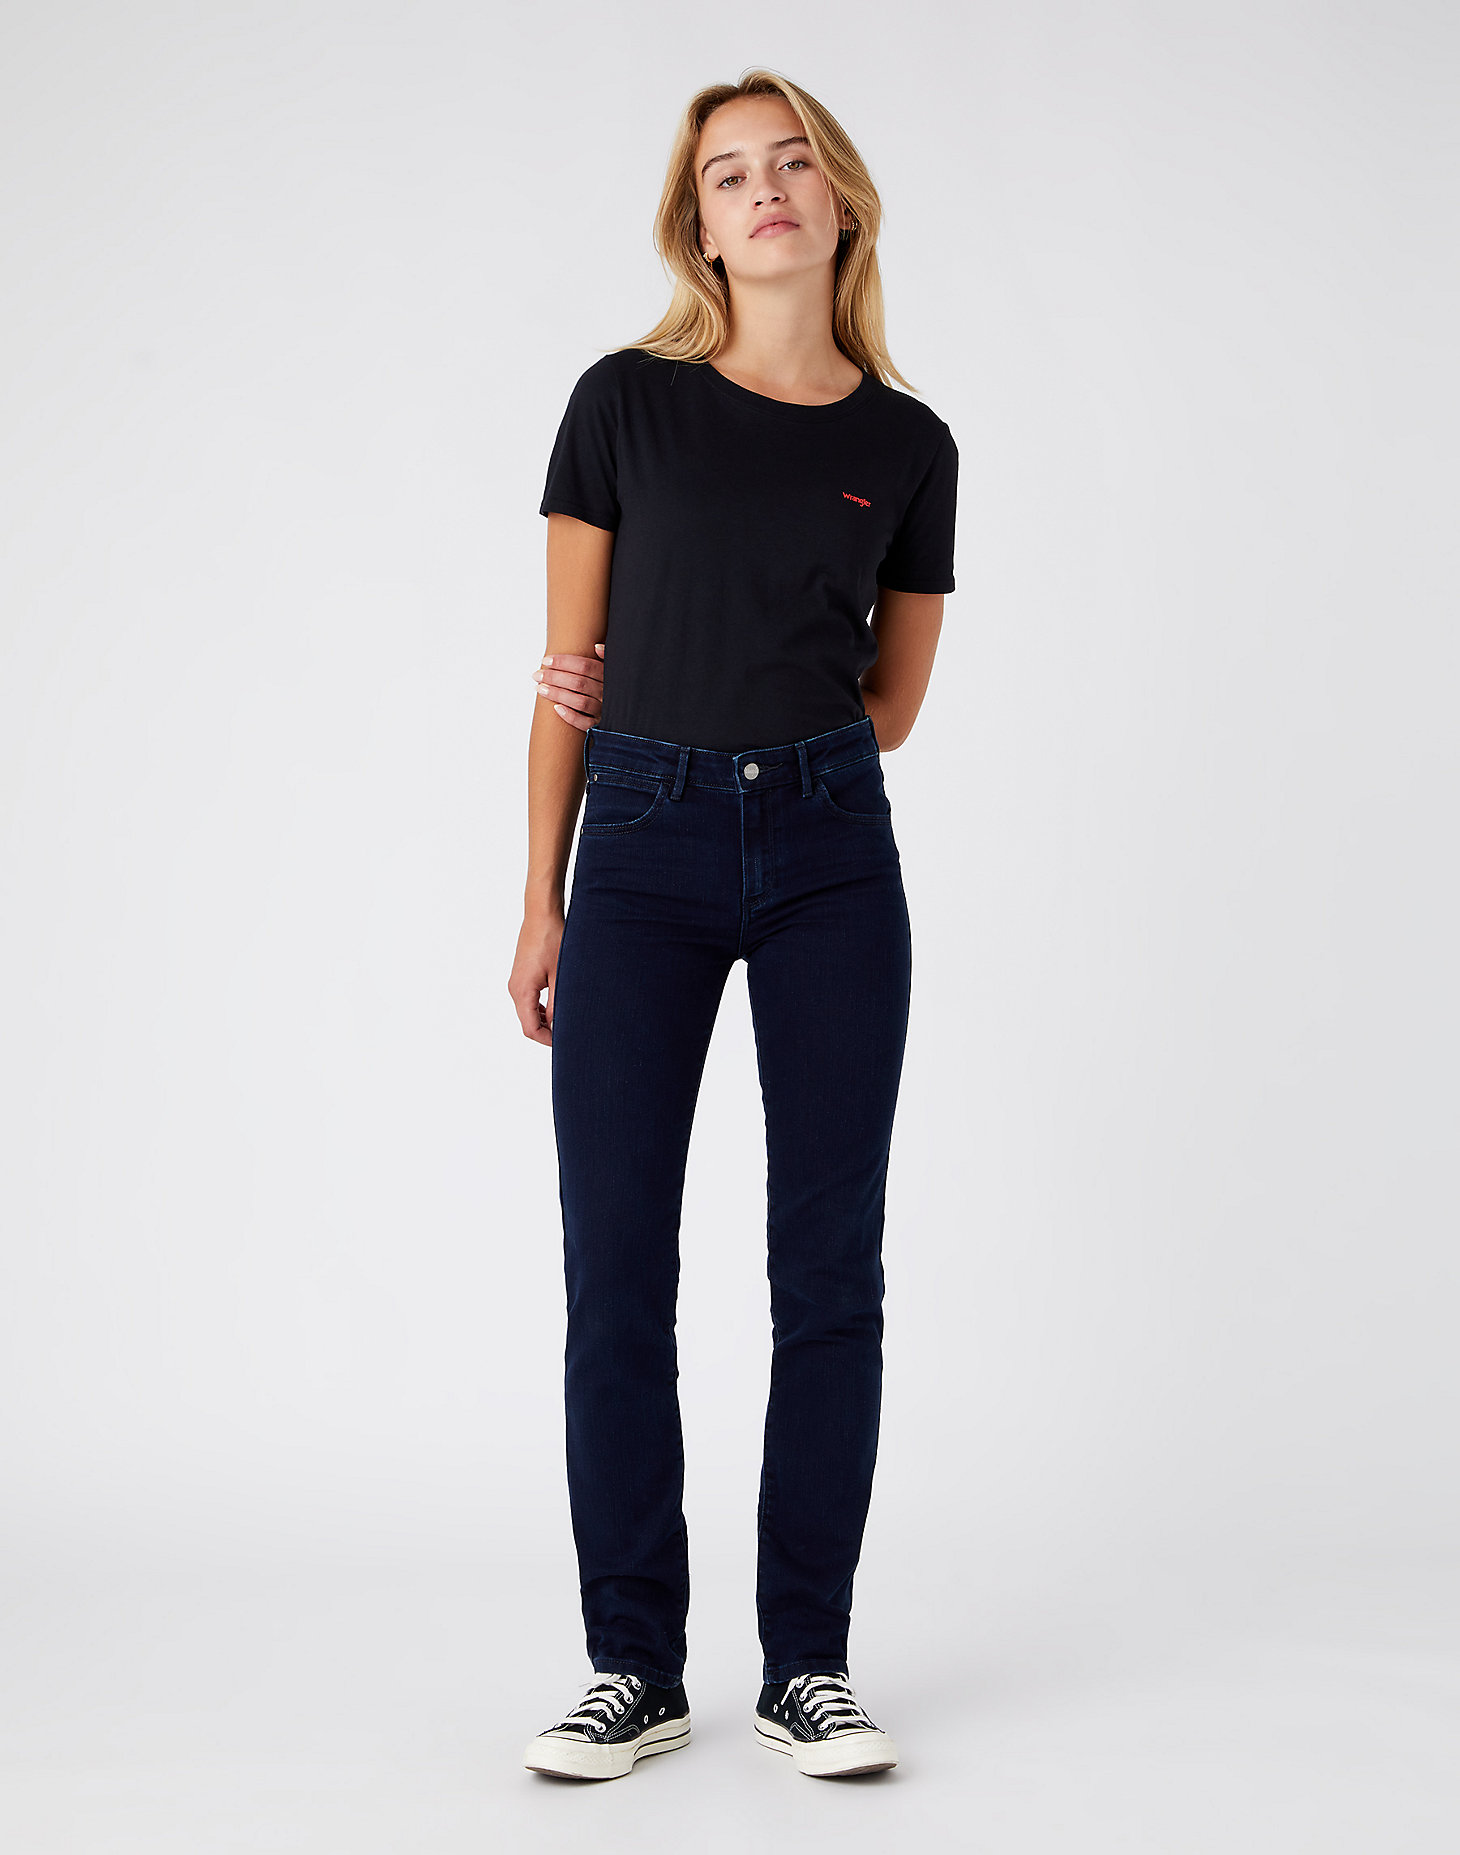 Straight Jeans in Blue Black alternative view 1